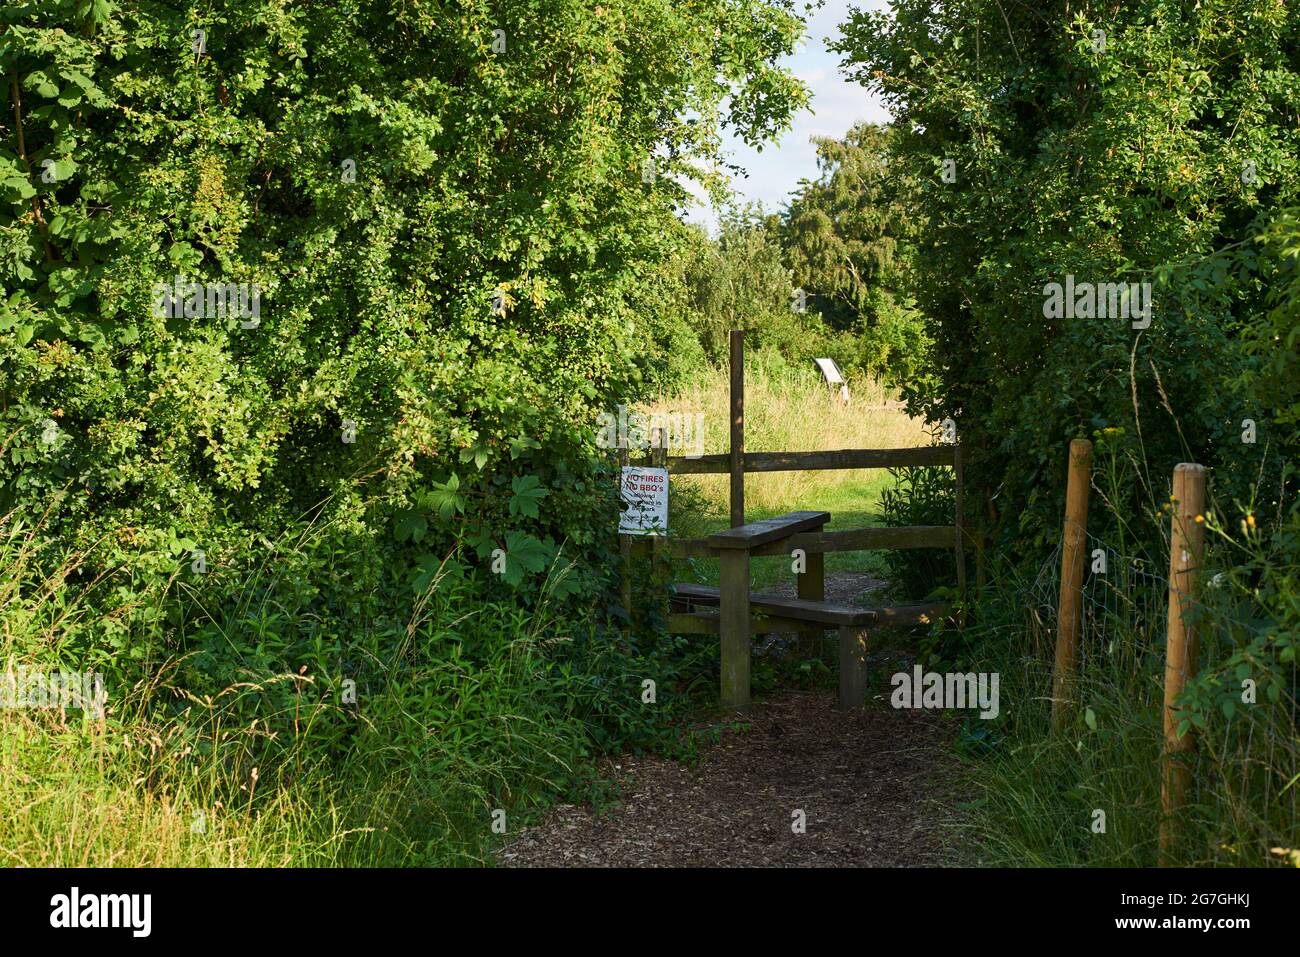 Stile at the entrance to Gillespie Park, Arsenal, North London UK Stock Photo